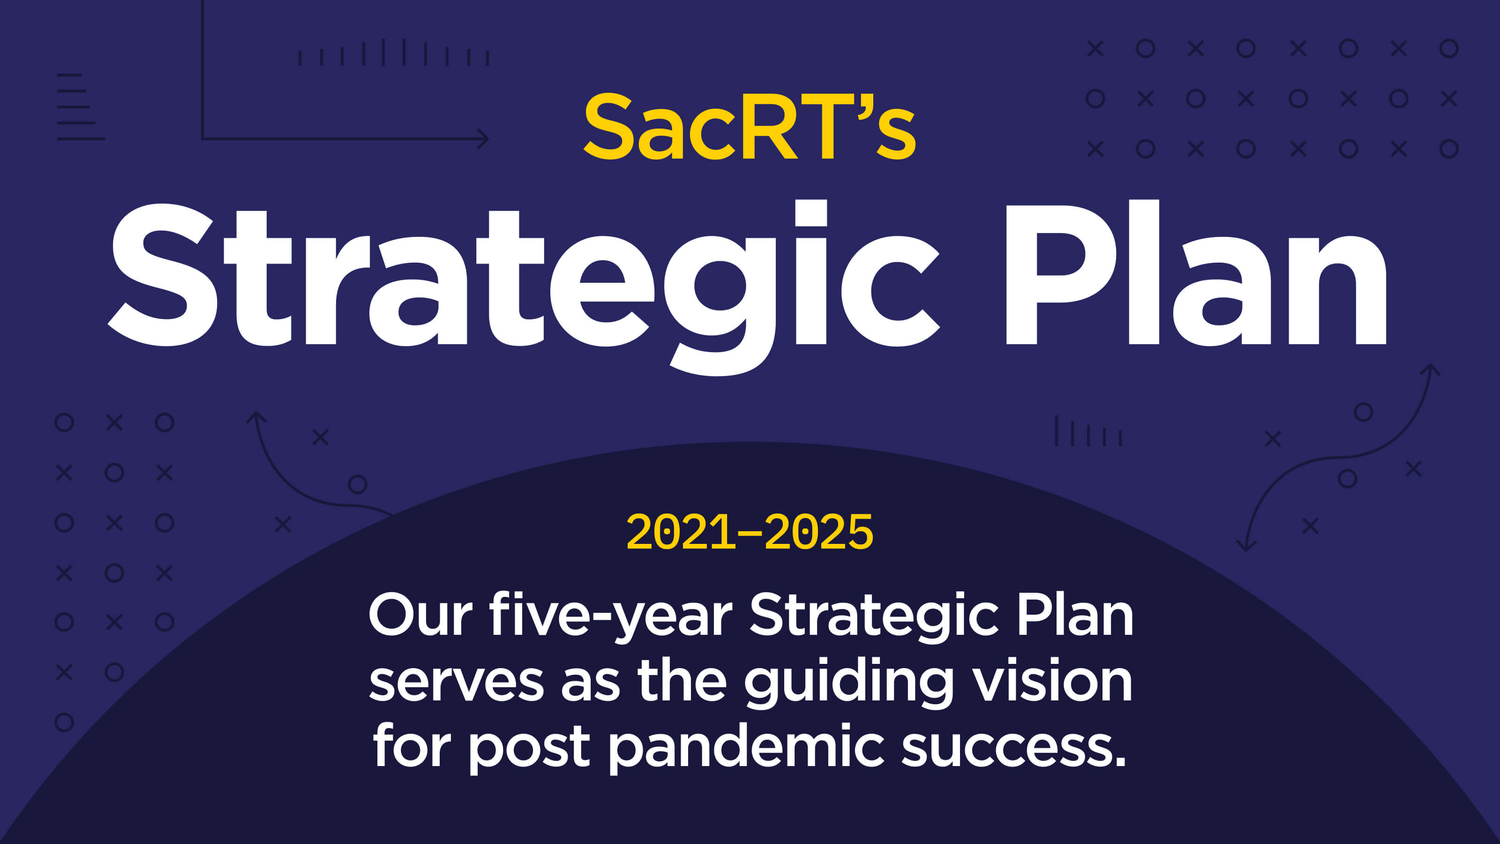 SacRT's strategic plan 2021 - 2025. Our five-year strategic plan serves as the guiding vision for post pandemic success. 